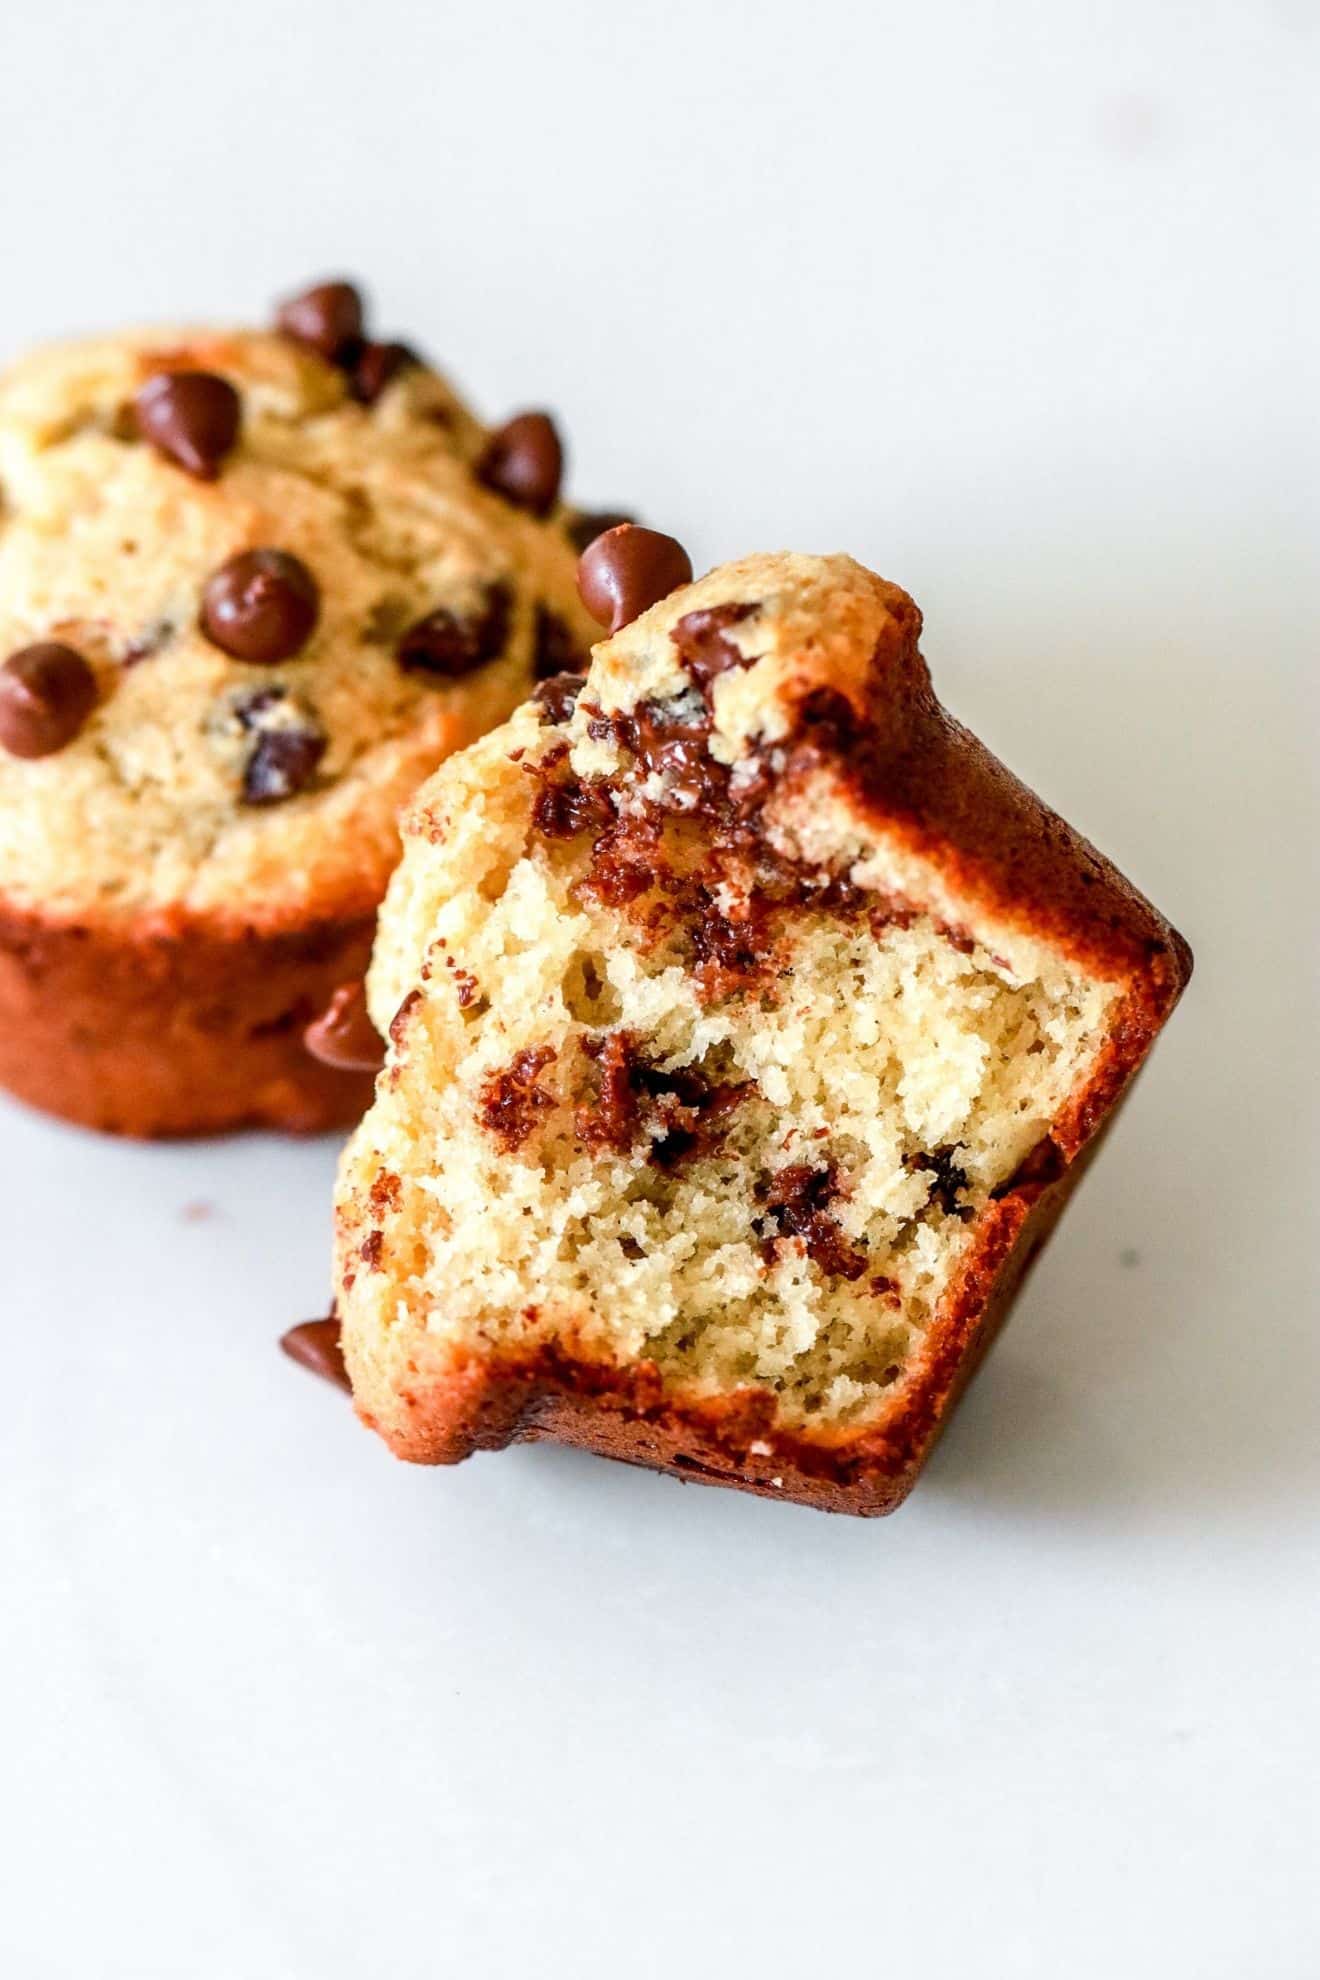 20-Min Mini Chocolate Chip Muffins - The Toasted Pine Nut